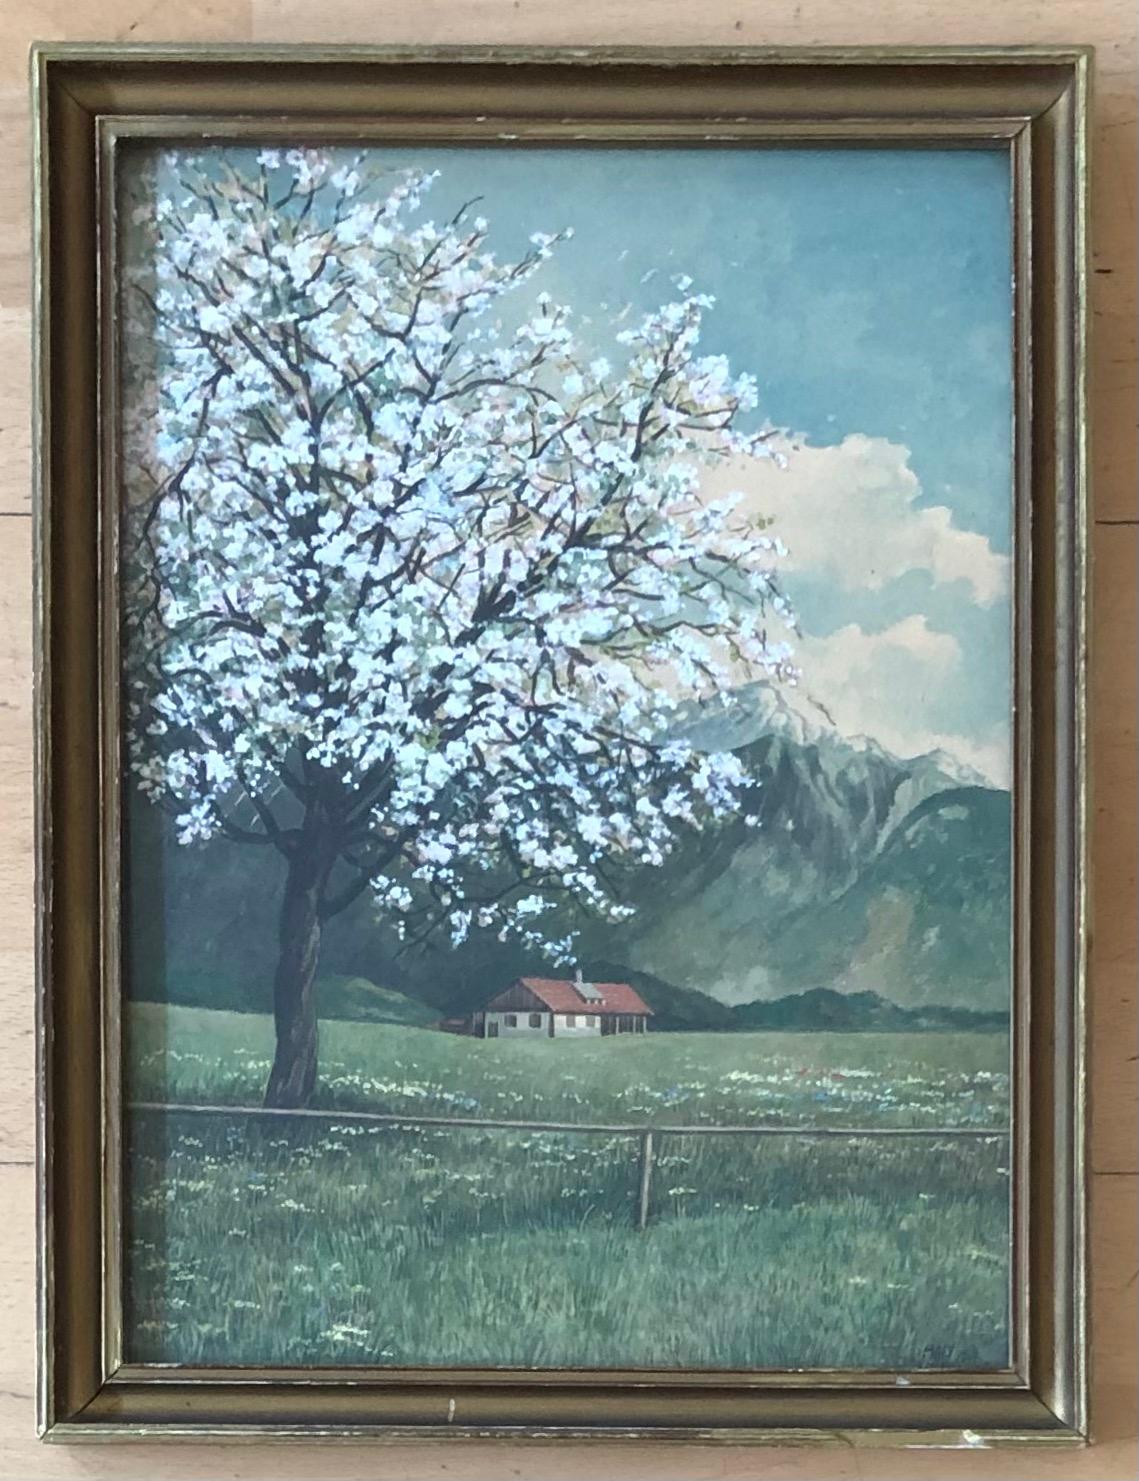 Flowering tree at the foot of the Austrian Alps - Art by U. Maly